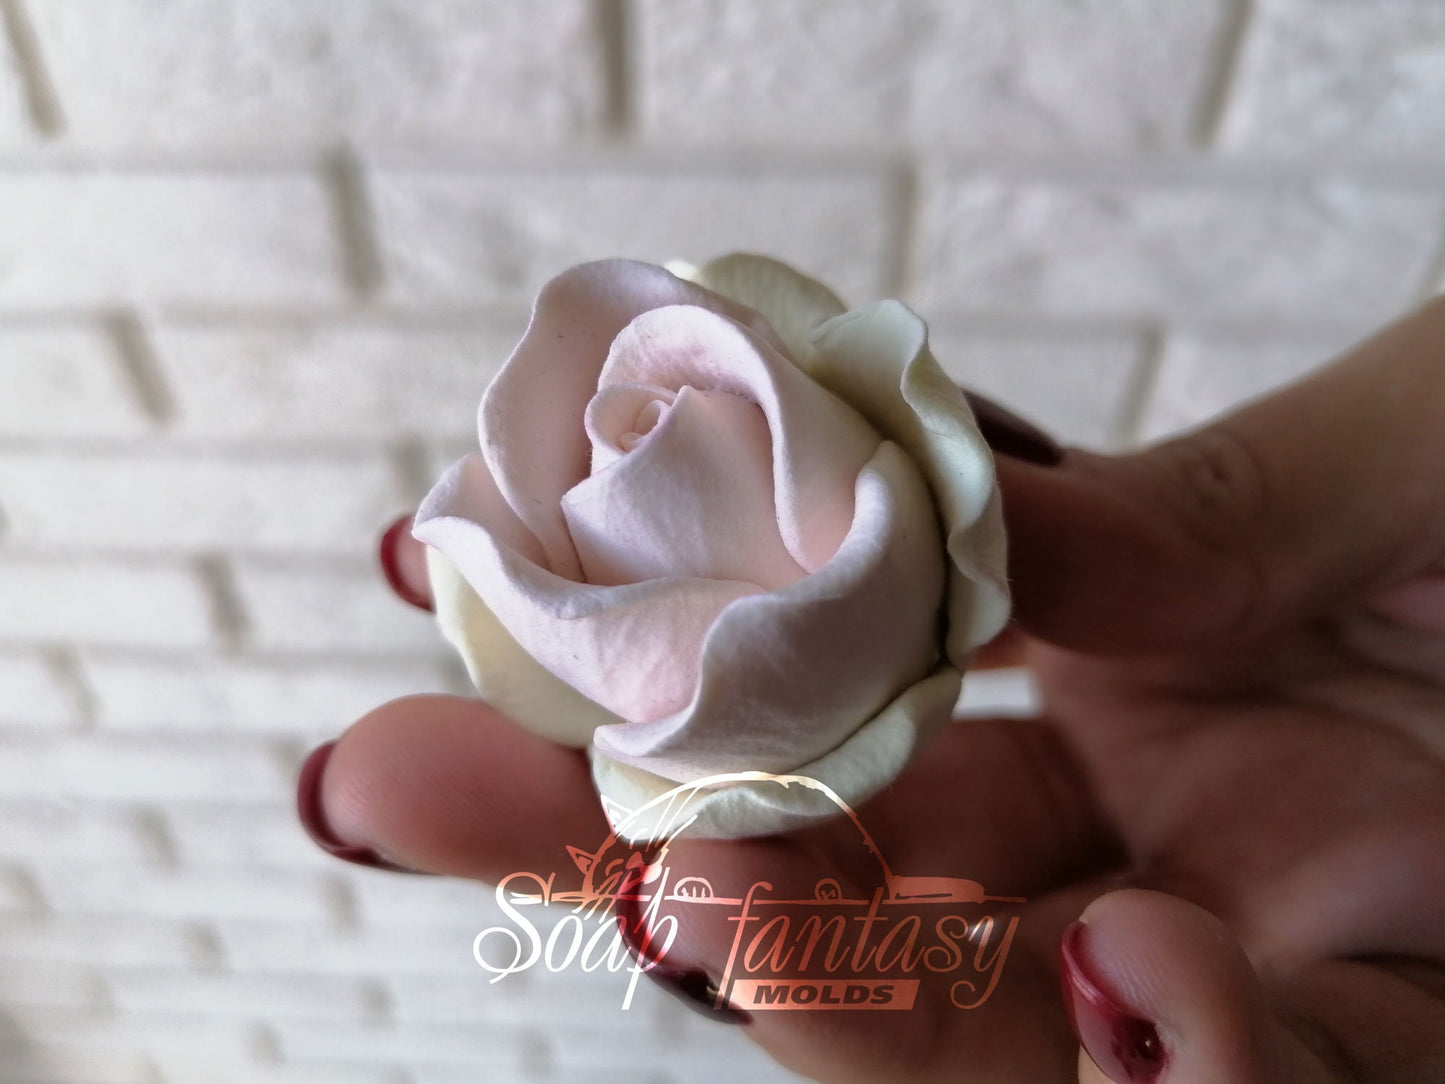 Half-blooming rose bud "Estelle" silicone mold for soap making